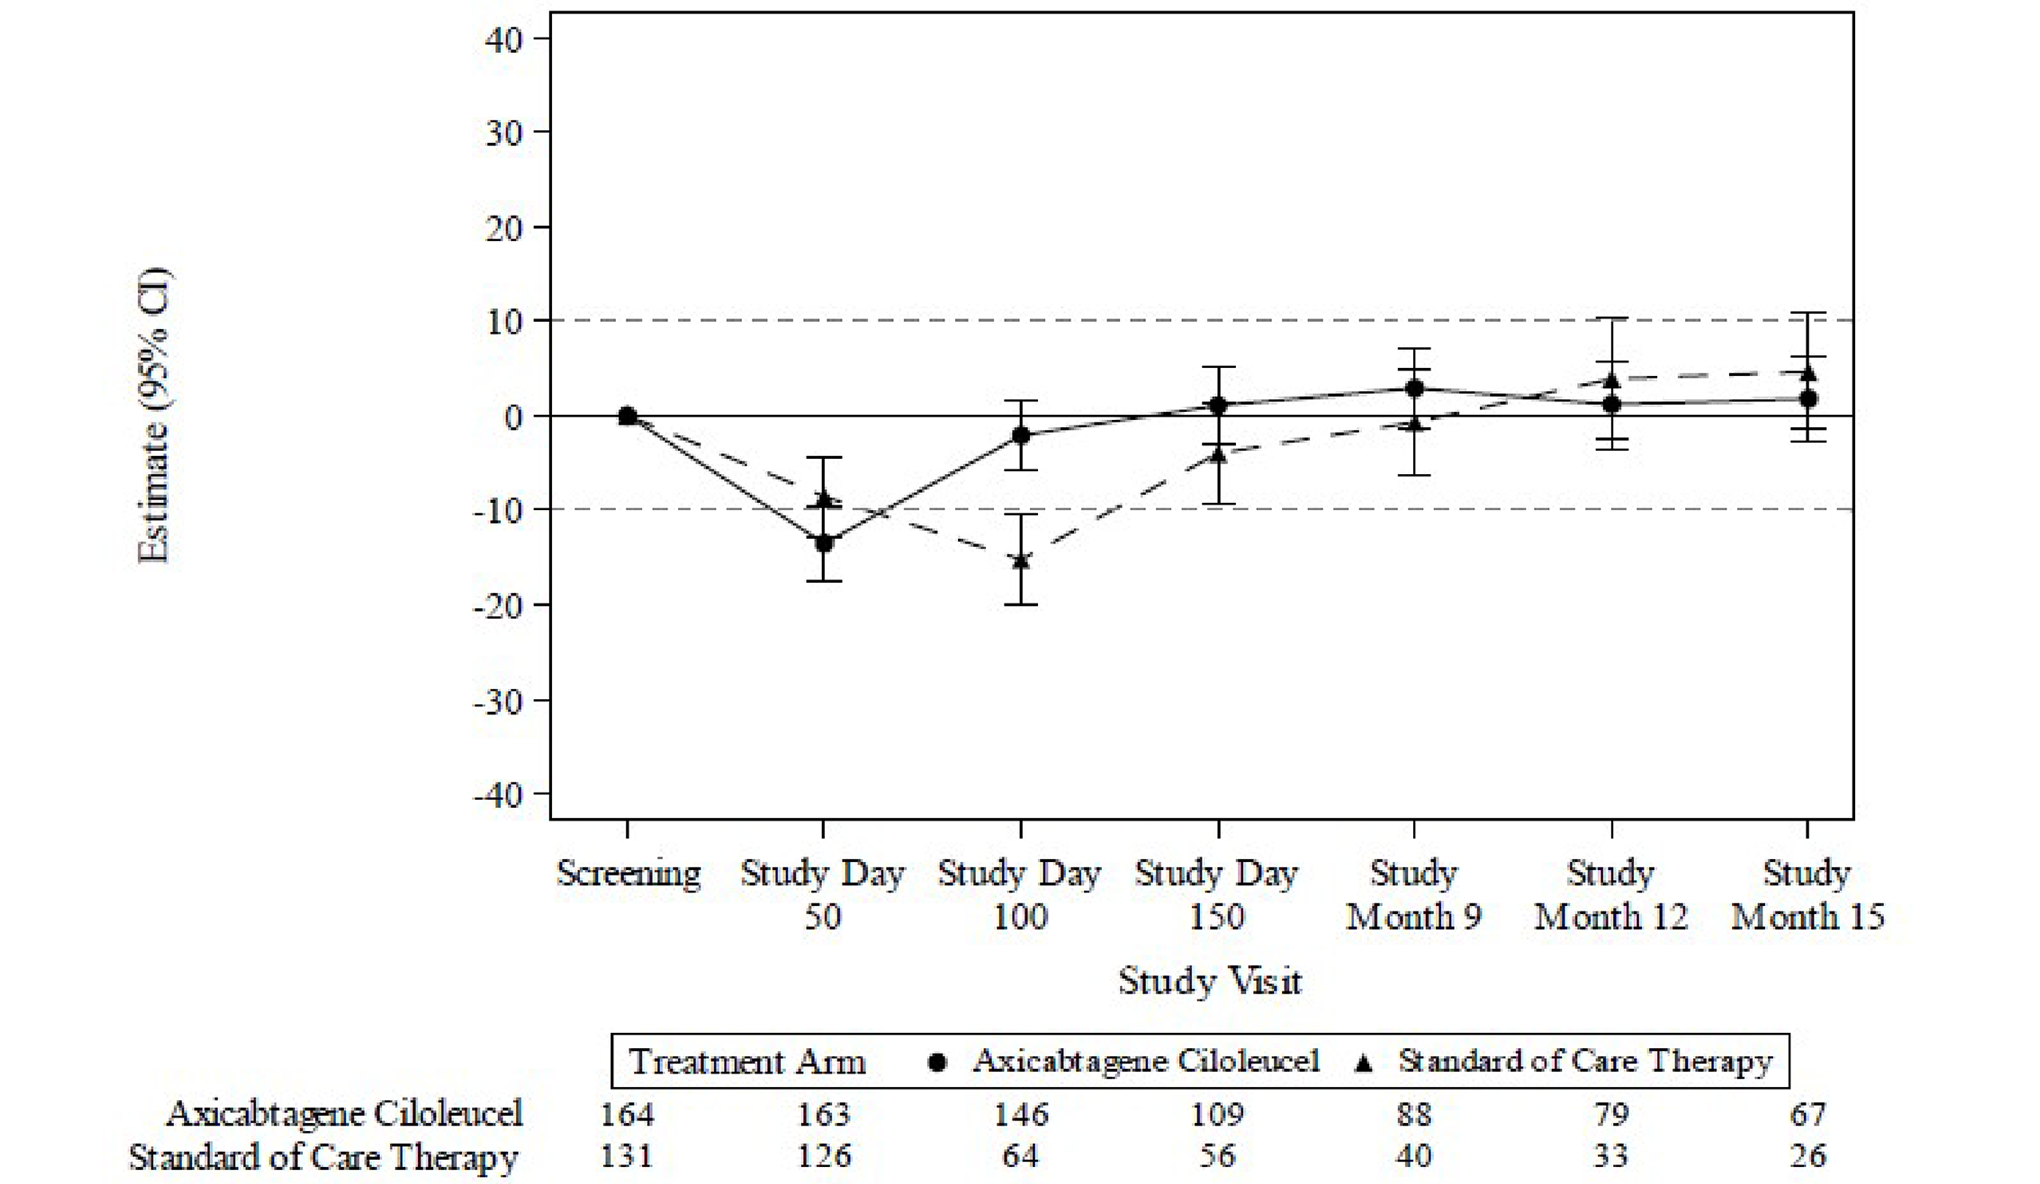 The y-axis is the estimate (95%) ranging from –40 to 40; the x-axis is the study visit ranging from screening to study month 15. Points with bars depicting the 95% CI are shown at each study visit with lines connecting them. The estimates for both groups are 0 at the screening visit. At study day 50, the estimate is –10 in the SOC arm and approximately –14 in the axi-cel arm. The estimate then increases in the axi-cel arm, crossing 0 by study day 150. The estimate decreases in the SOC arm at study day 100 then increases and crosses the axi-cel arm’s line by study month 12.